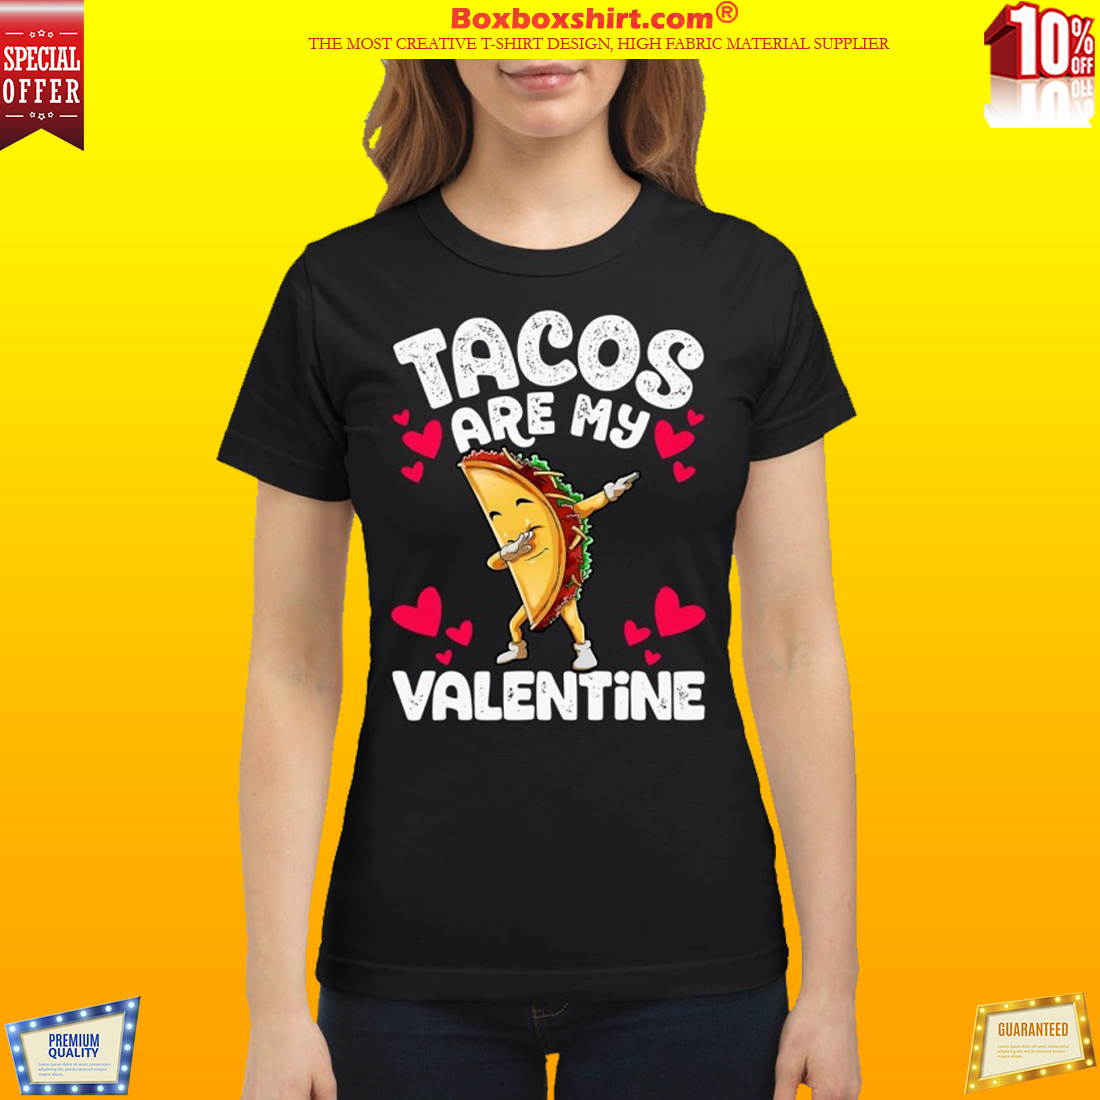 Tacos are my valentine shirt